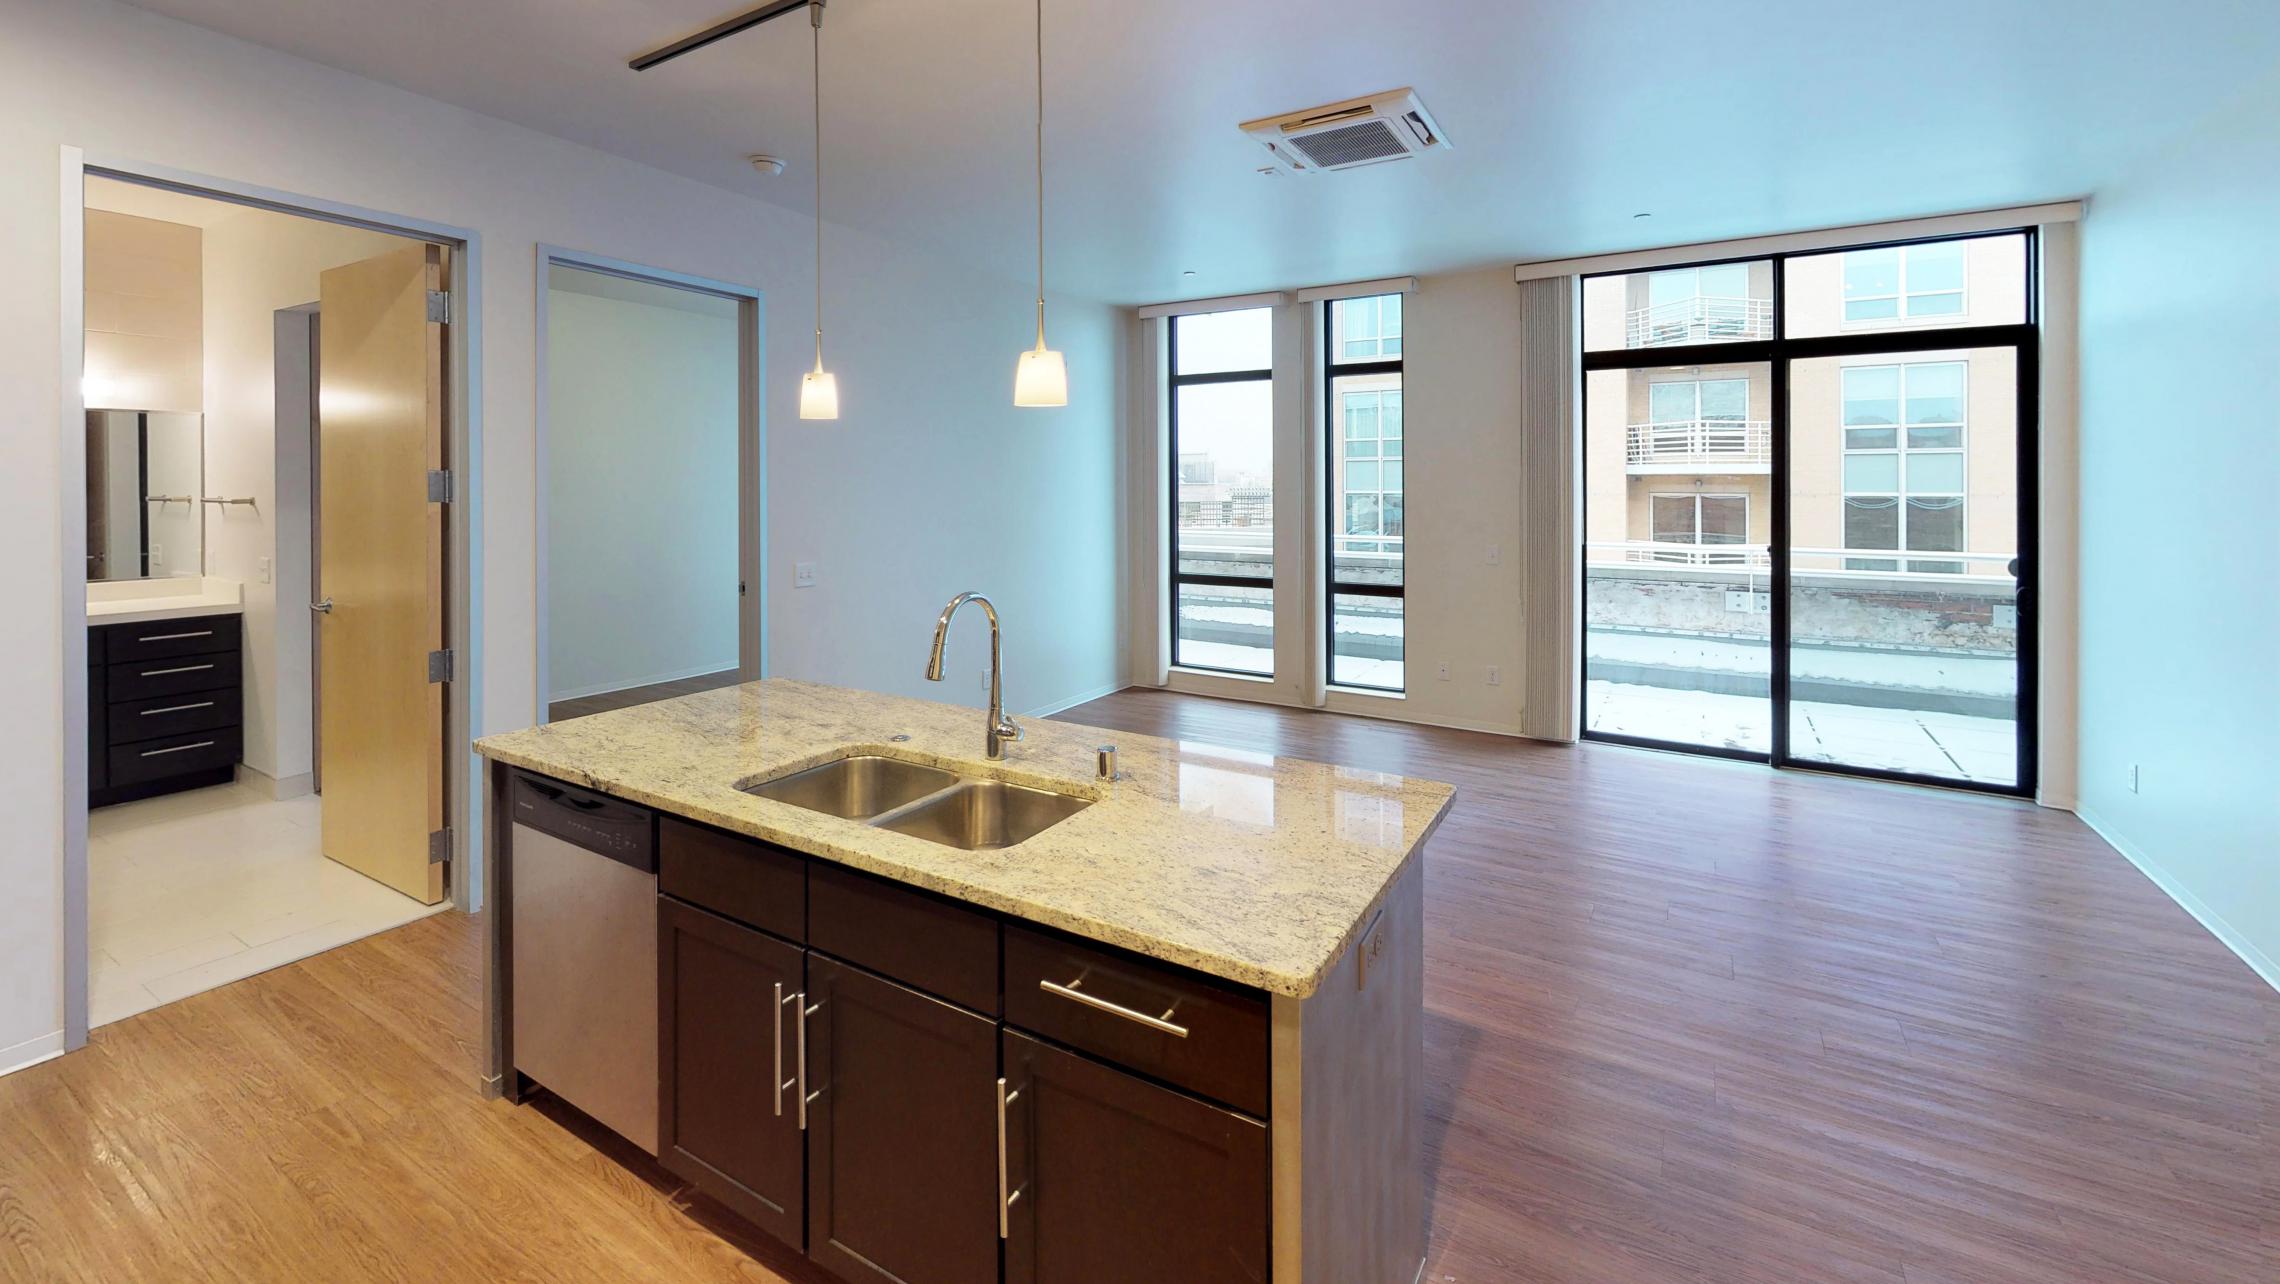 Capitol-Hill-500-Kitchen-living room-one bedroom-lakeview-balcony-penthouse-luxury.jpg